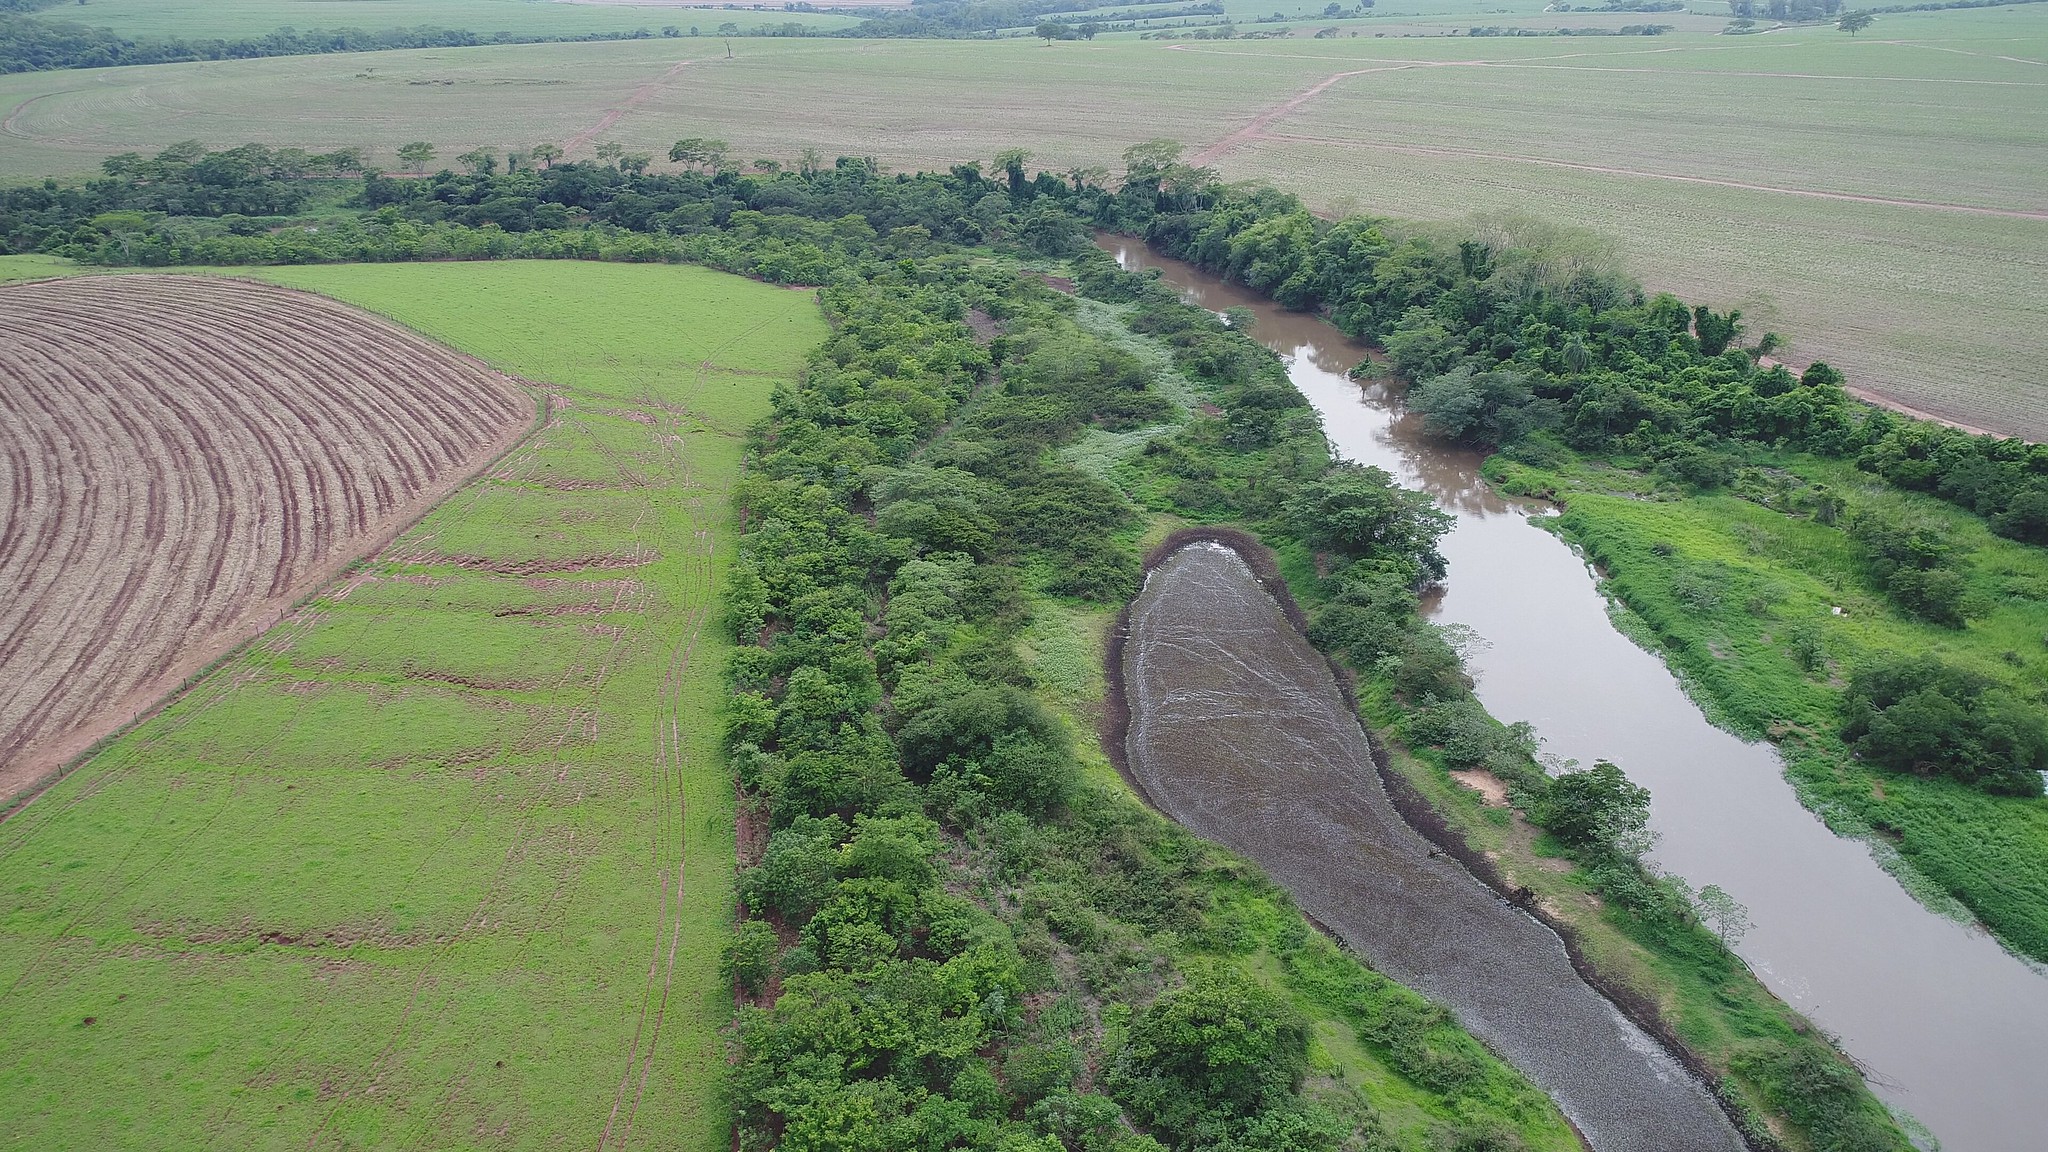 AES Brasil is already restoring sites that the Brazilian Forest Code requires to be placed under restoration. The Tietê Forests project focuses on additional sites where this is not obligatory by law. © AES